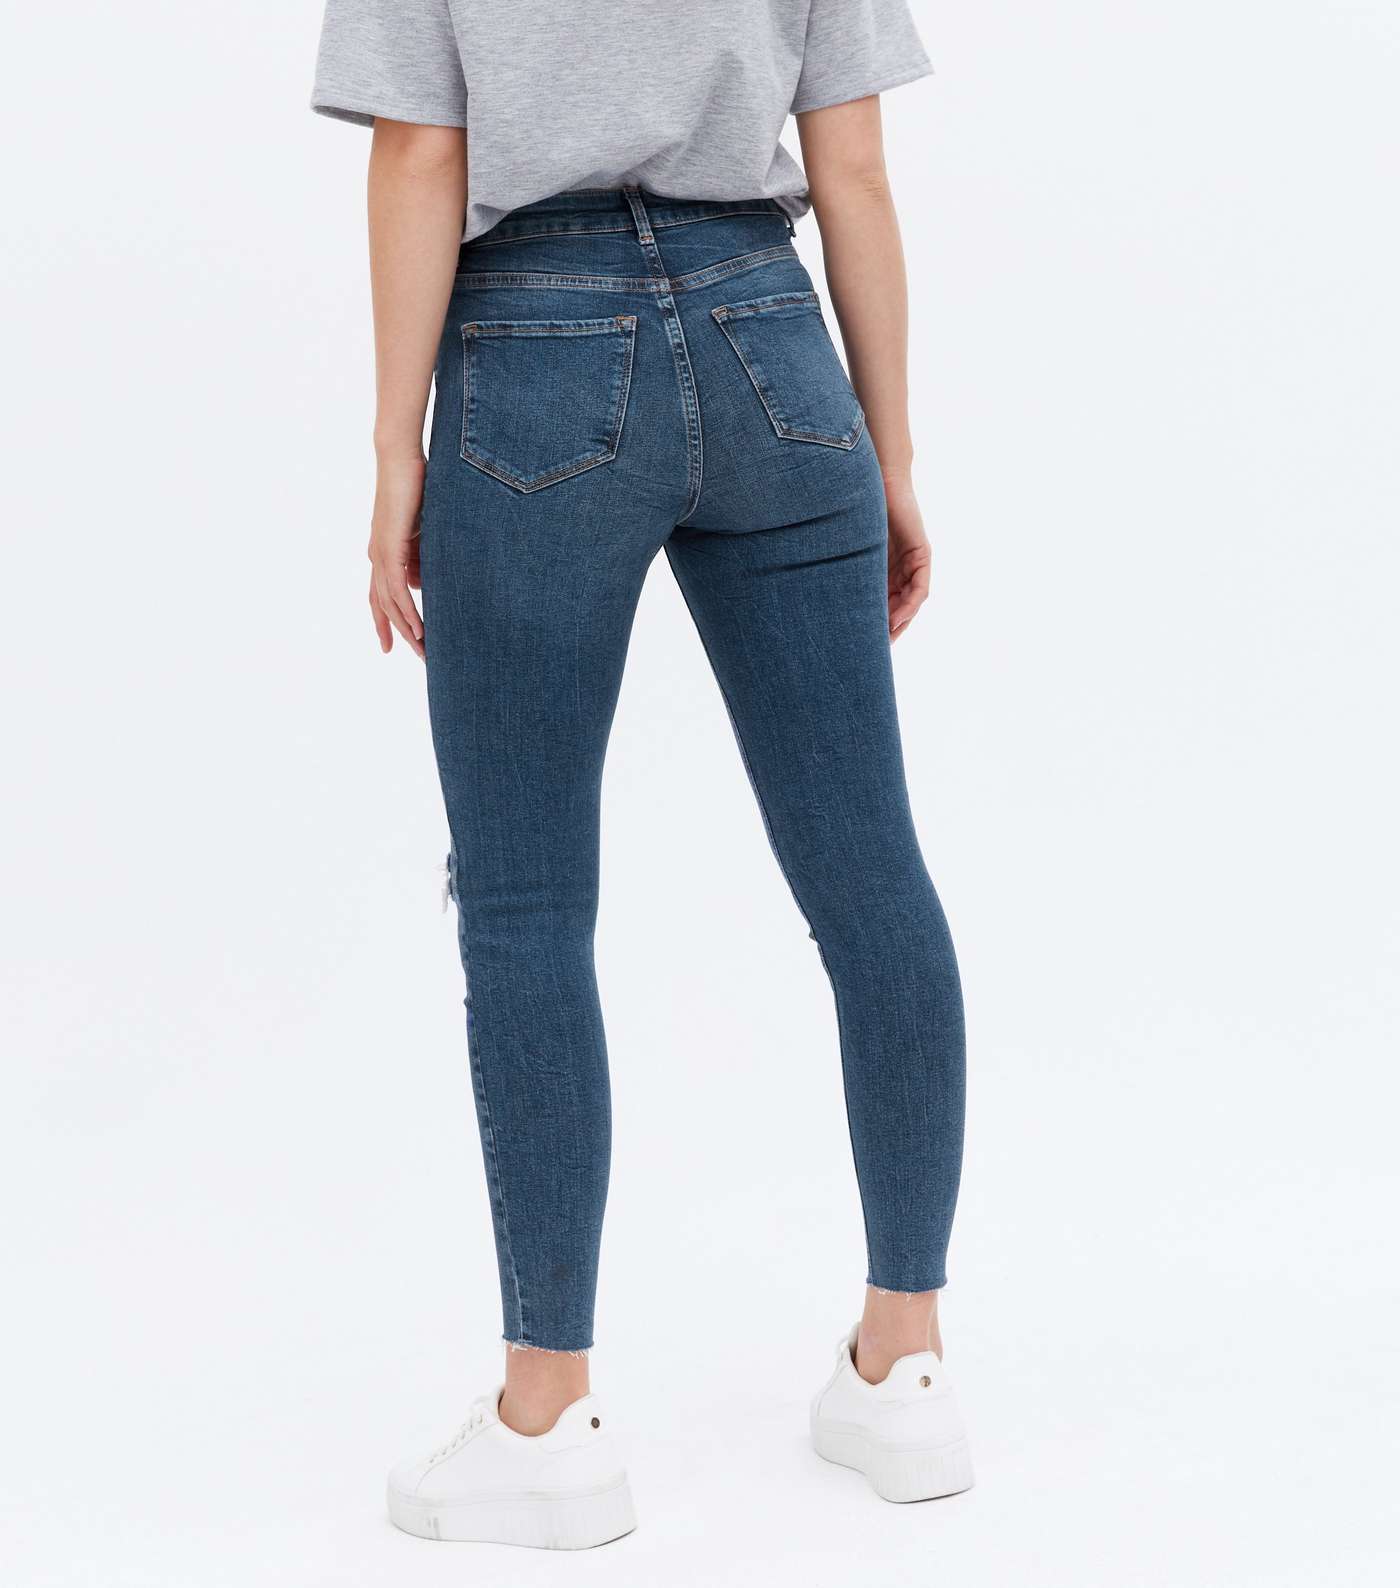 Blue Ripped Knee High Rise Ashleigh Skinny Jeans Image 4